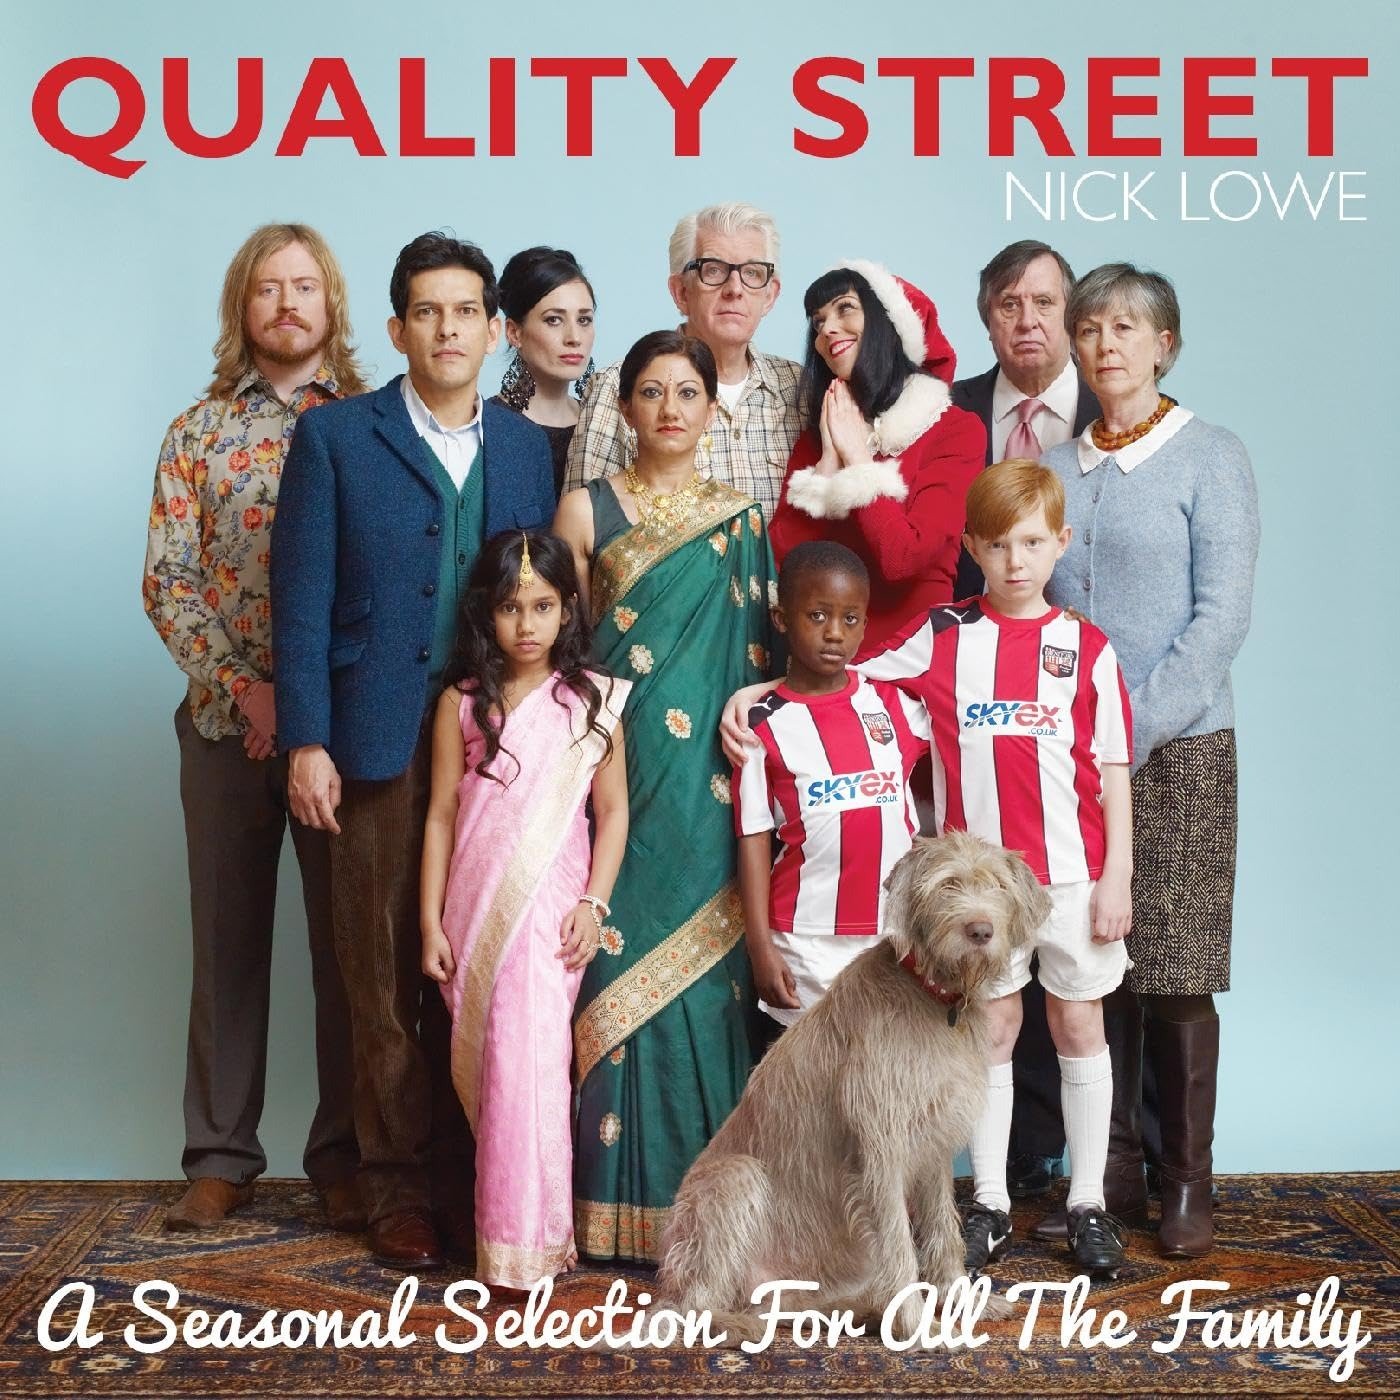 CD Shop - LOWE, NICK QUALITY STREET: A SEASONAL SELECTION FOR ALL THE FAMILY